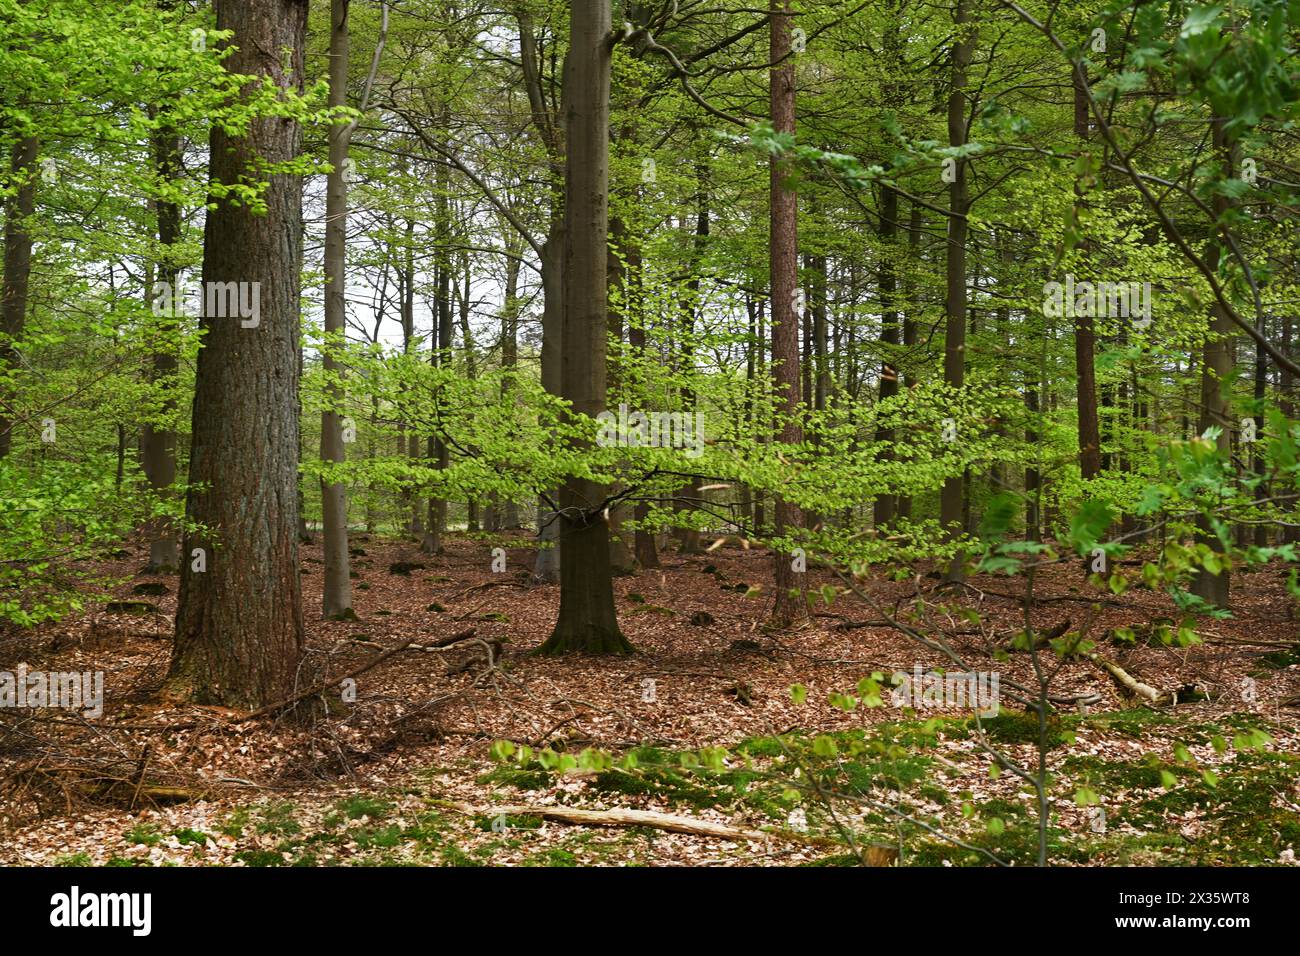 NL, Eesergroen: Spring characterises the landscape, towns and people in the province of Drenthe in the Netherlands. May green in April, forest in Dren Stock Photo